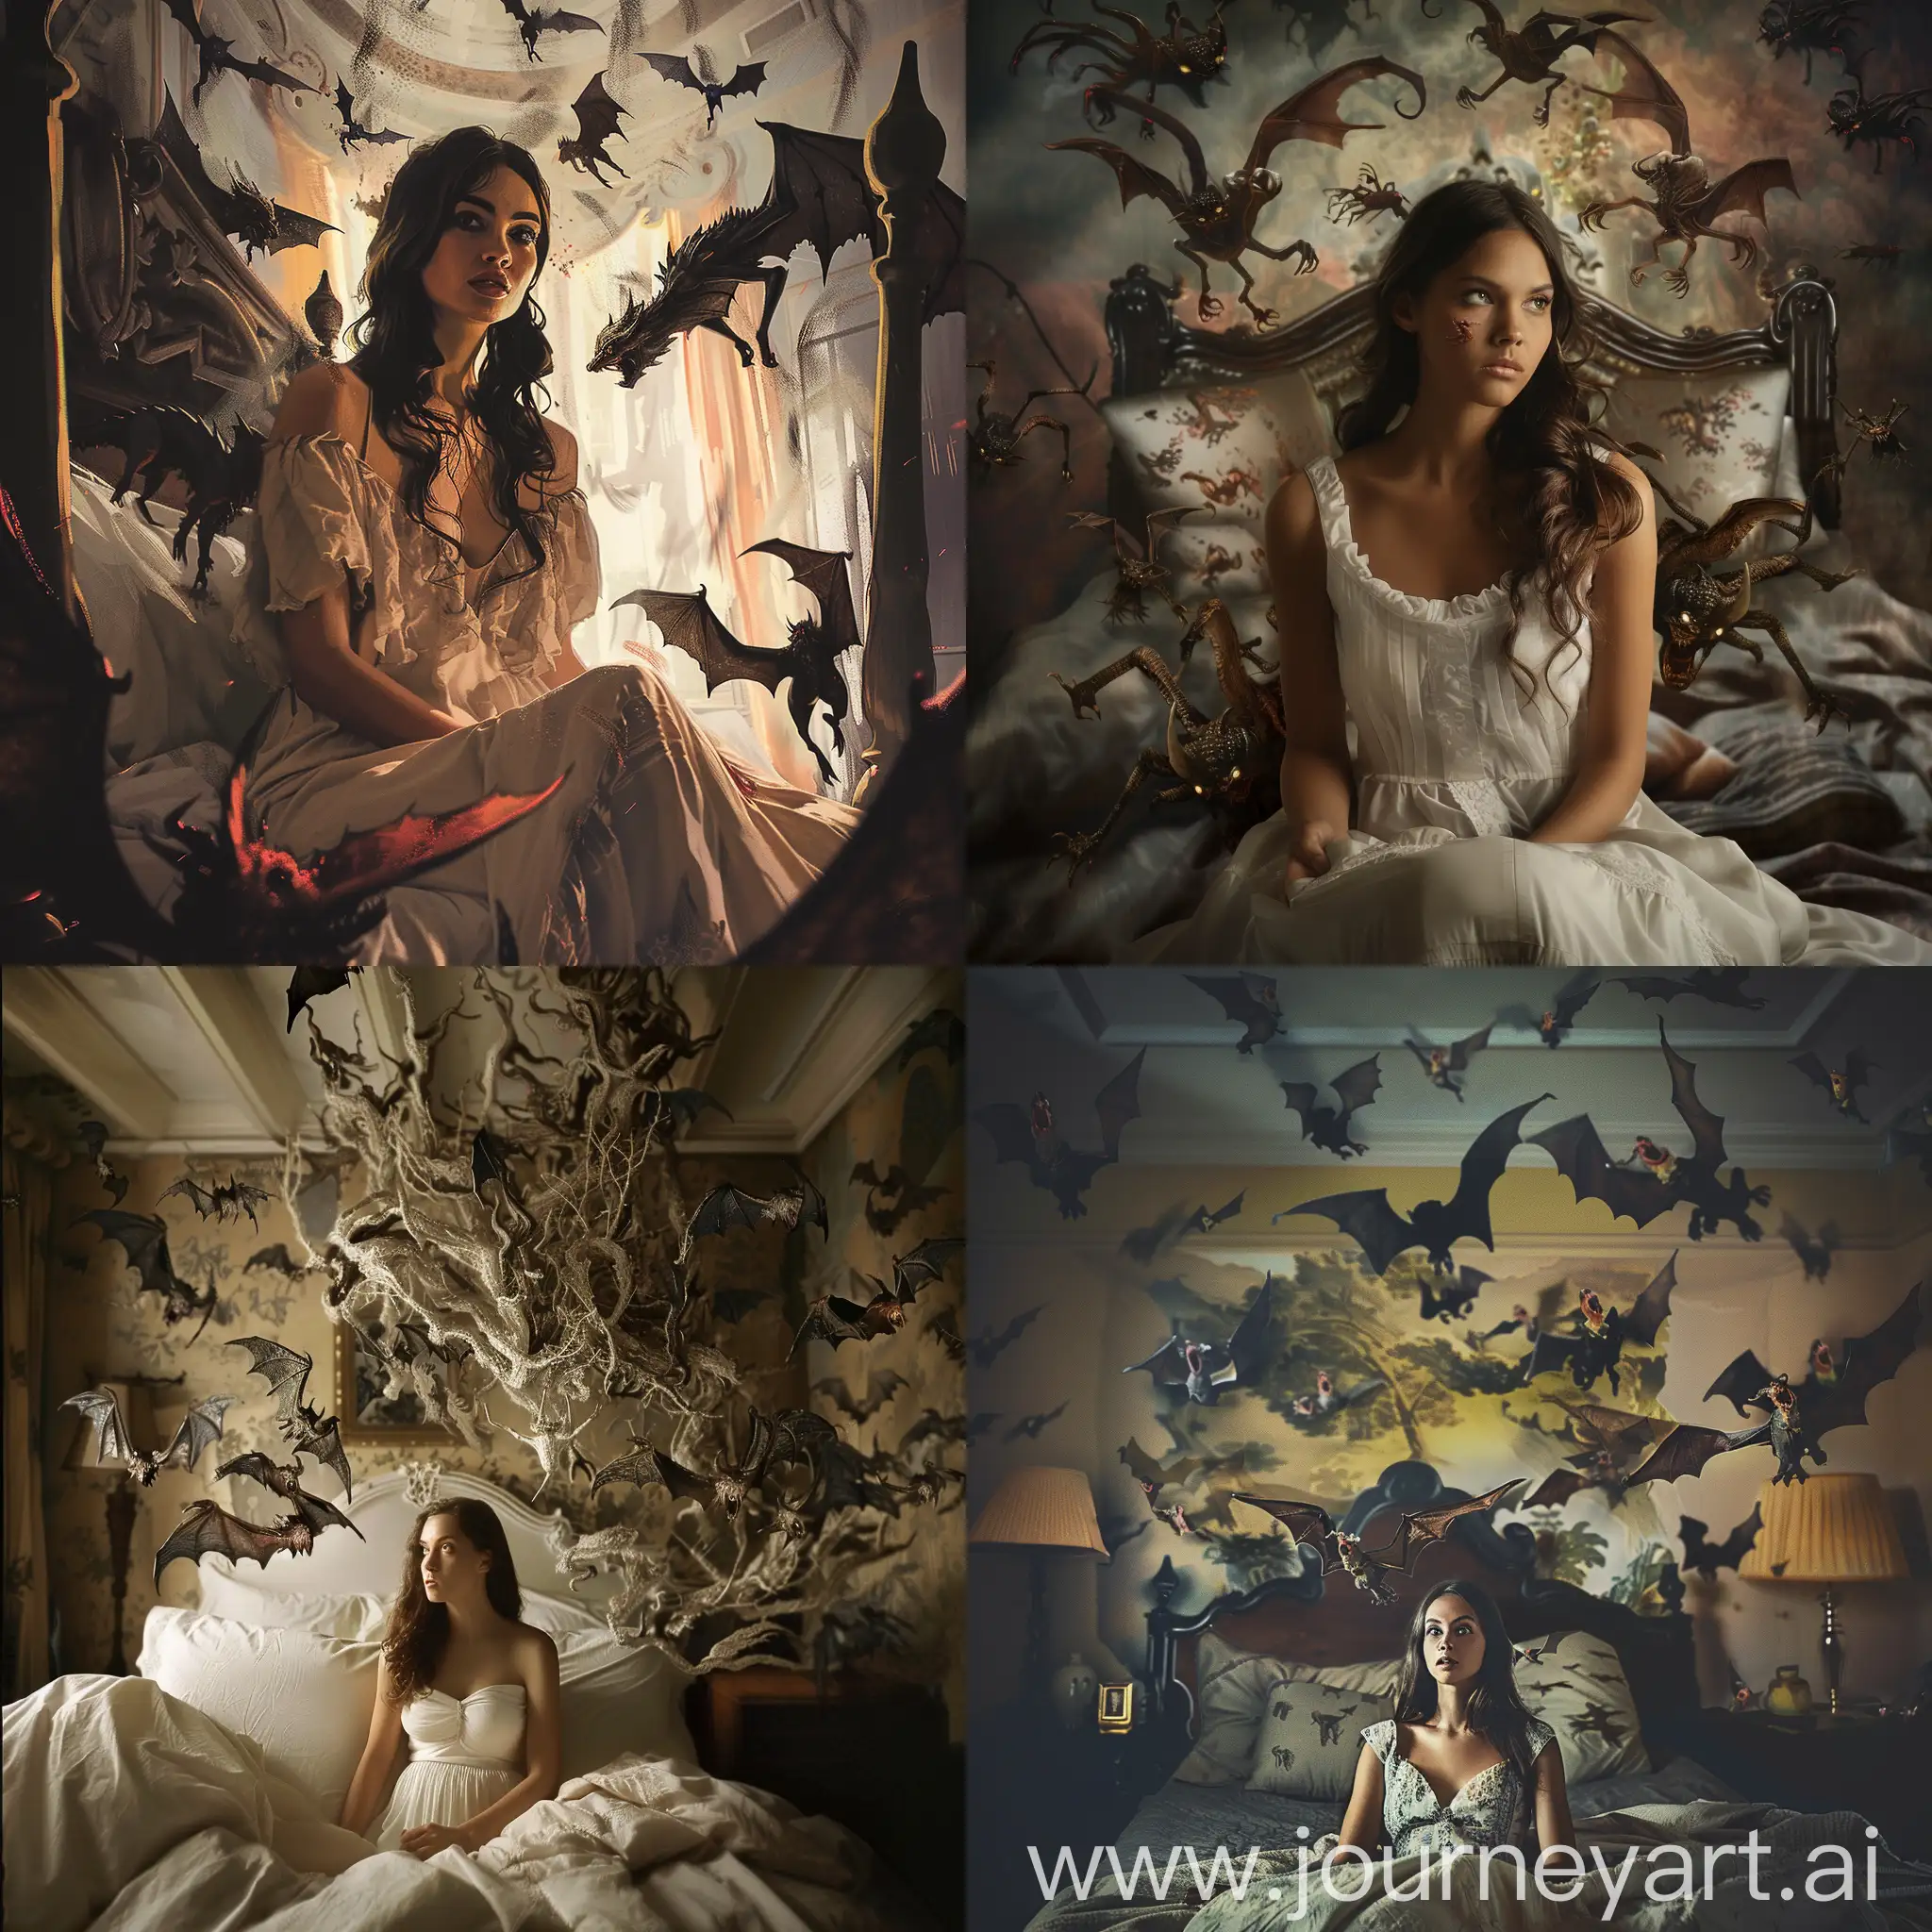 Mystical-Encounter-Beautiful-Woman-and-Flying-Demons-in-Bedroom